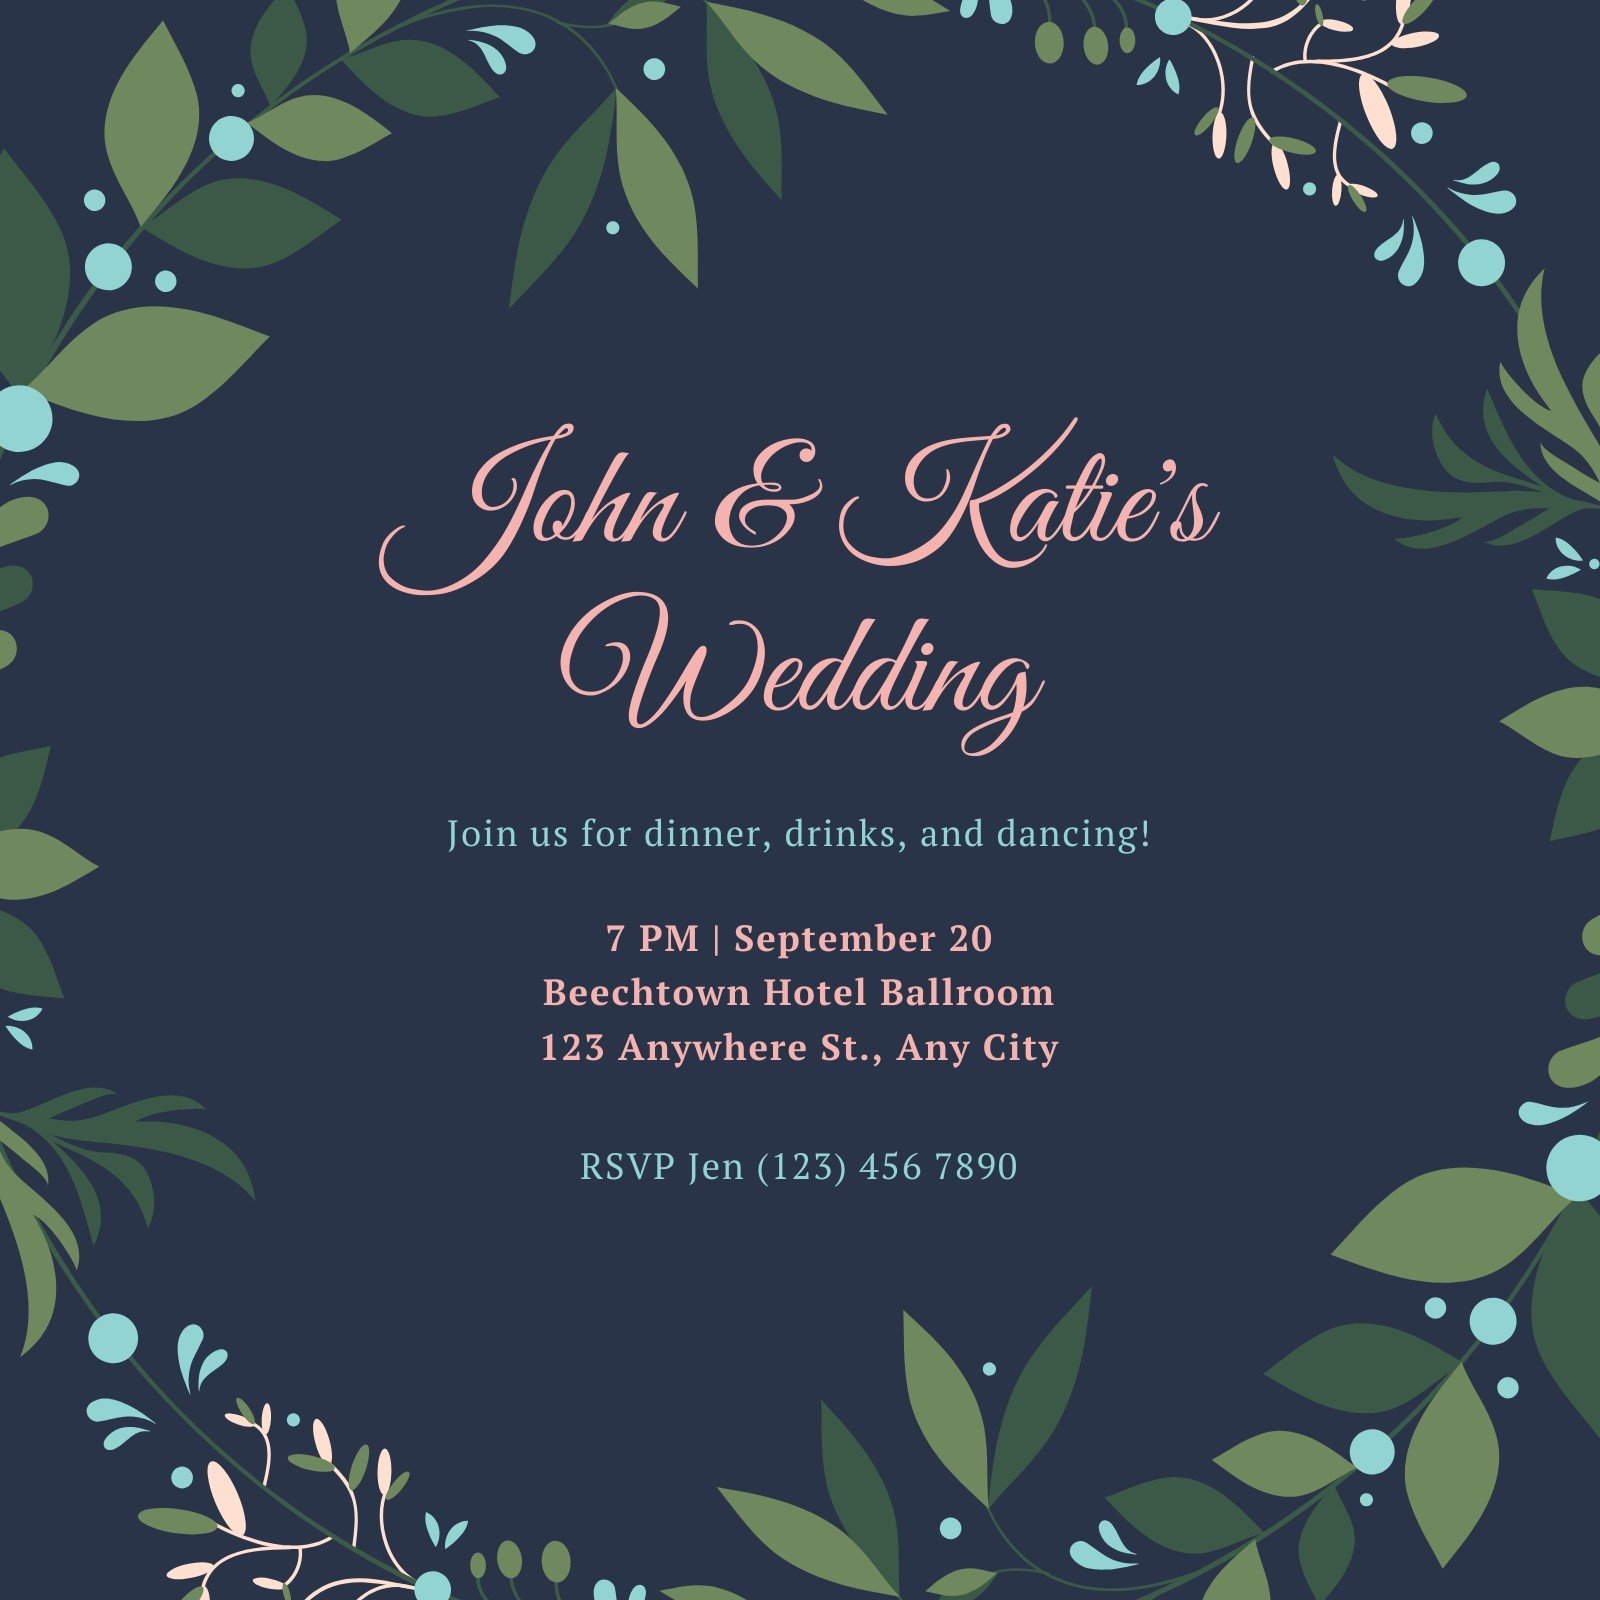 Blue and Pink Wreath Wedding Reception Invitation Templates by Canva